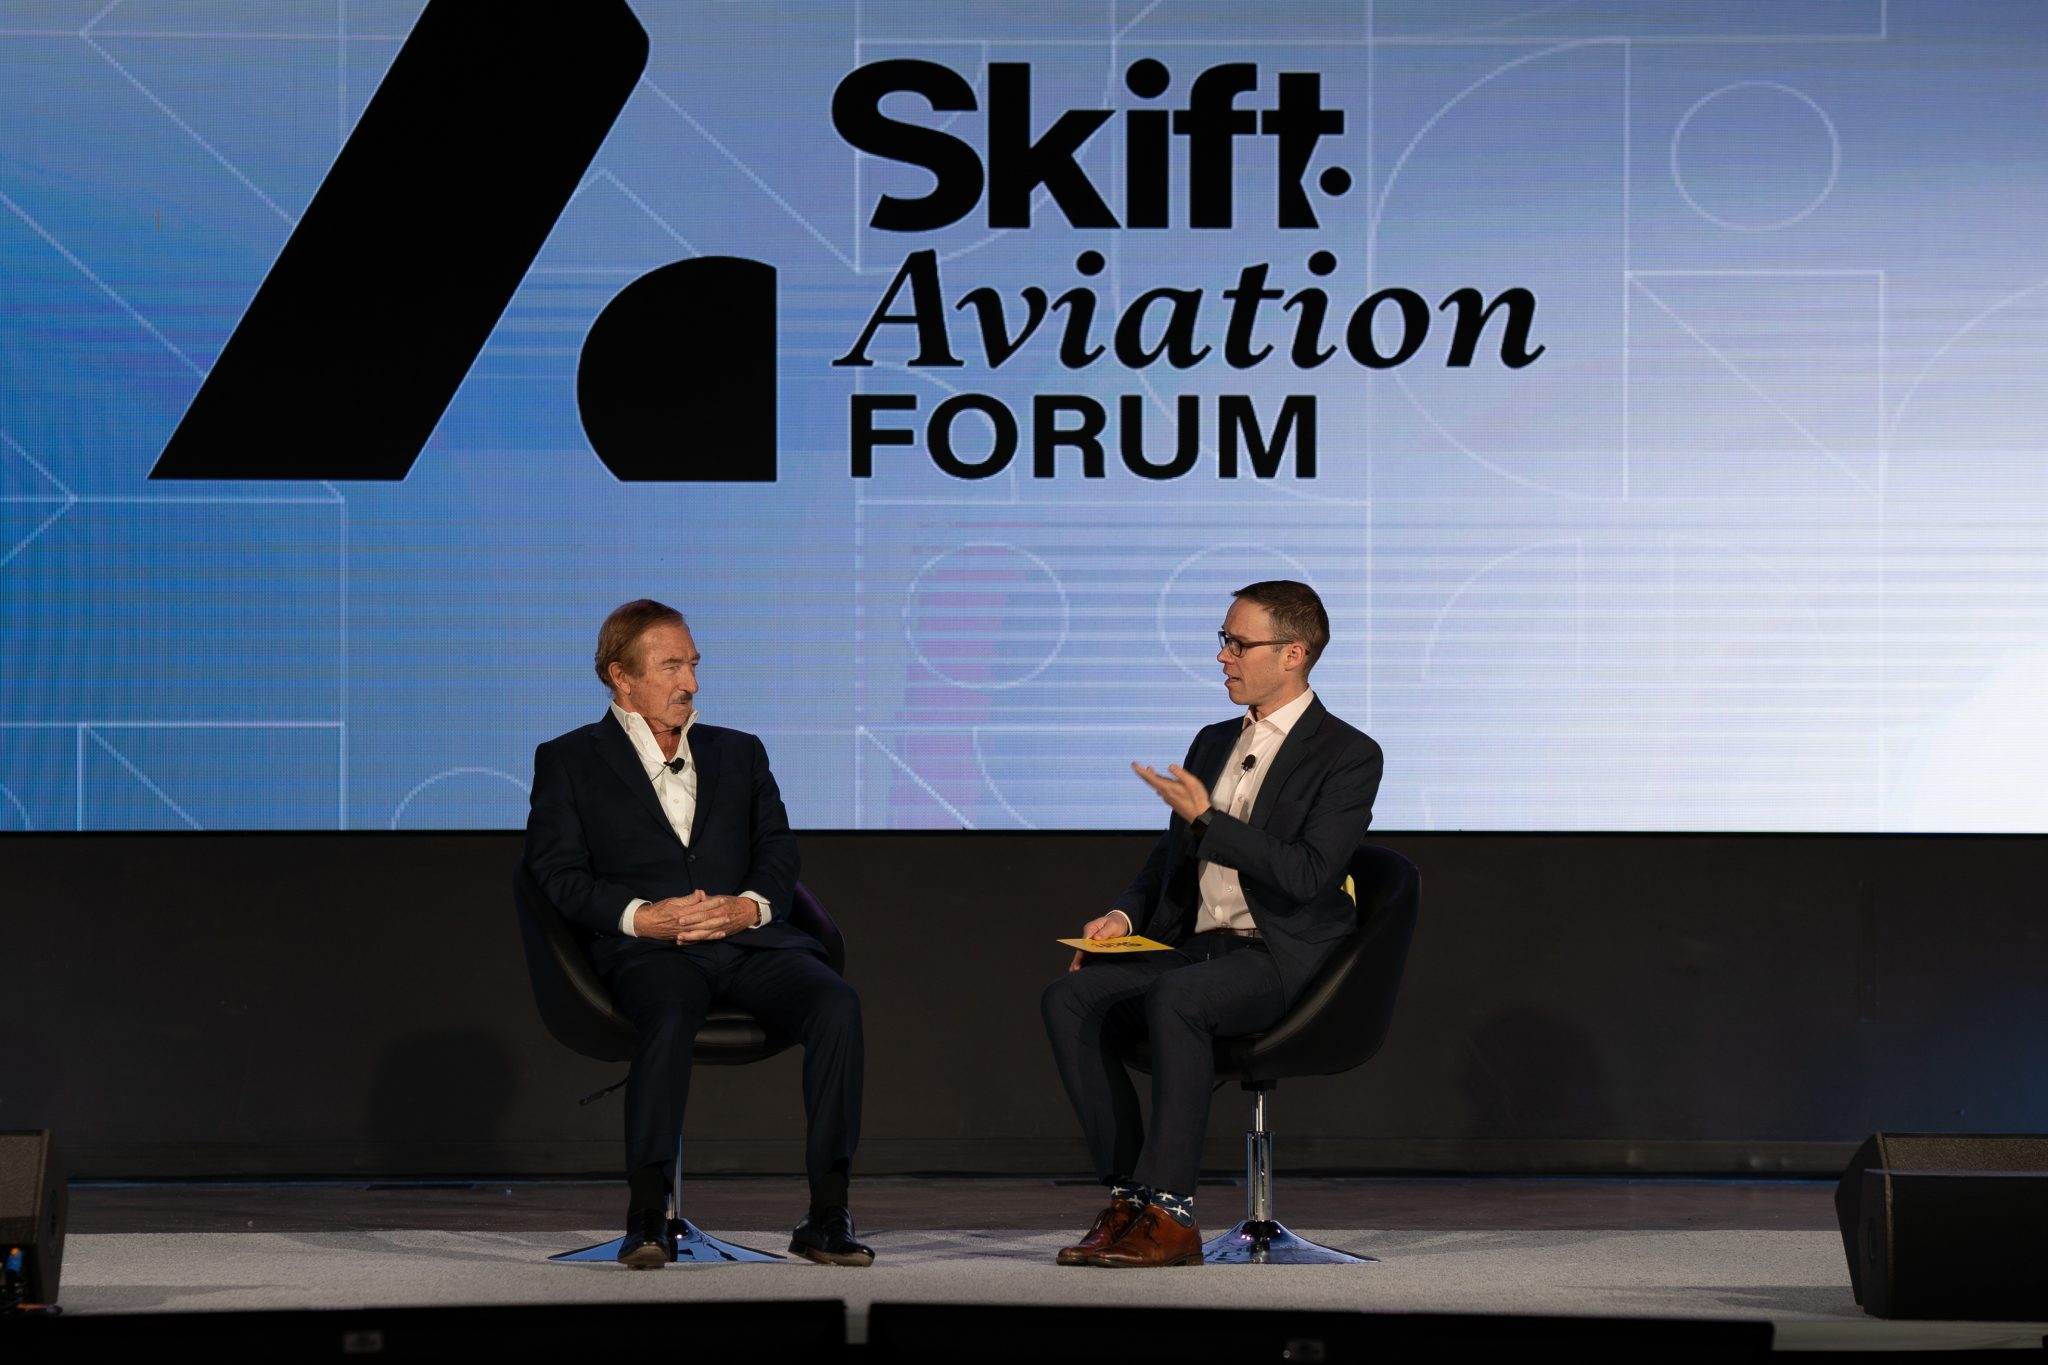 Steven Udvar-Hazy, chairman and co-founder of Air Lease Corp., in discussion with Airline Weekly Editor Edward Russell at Skift Aviation Forum in Dallas.